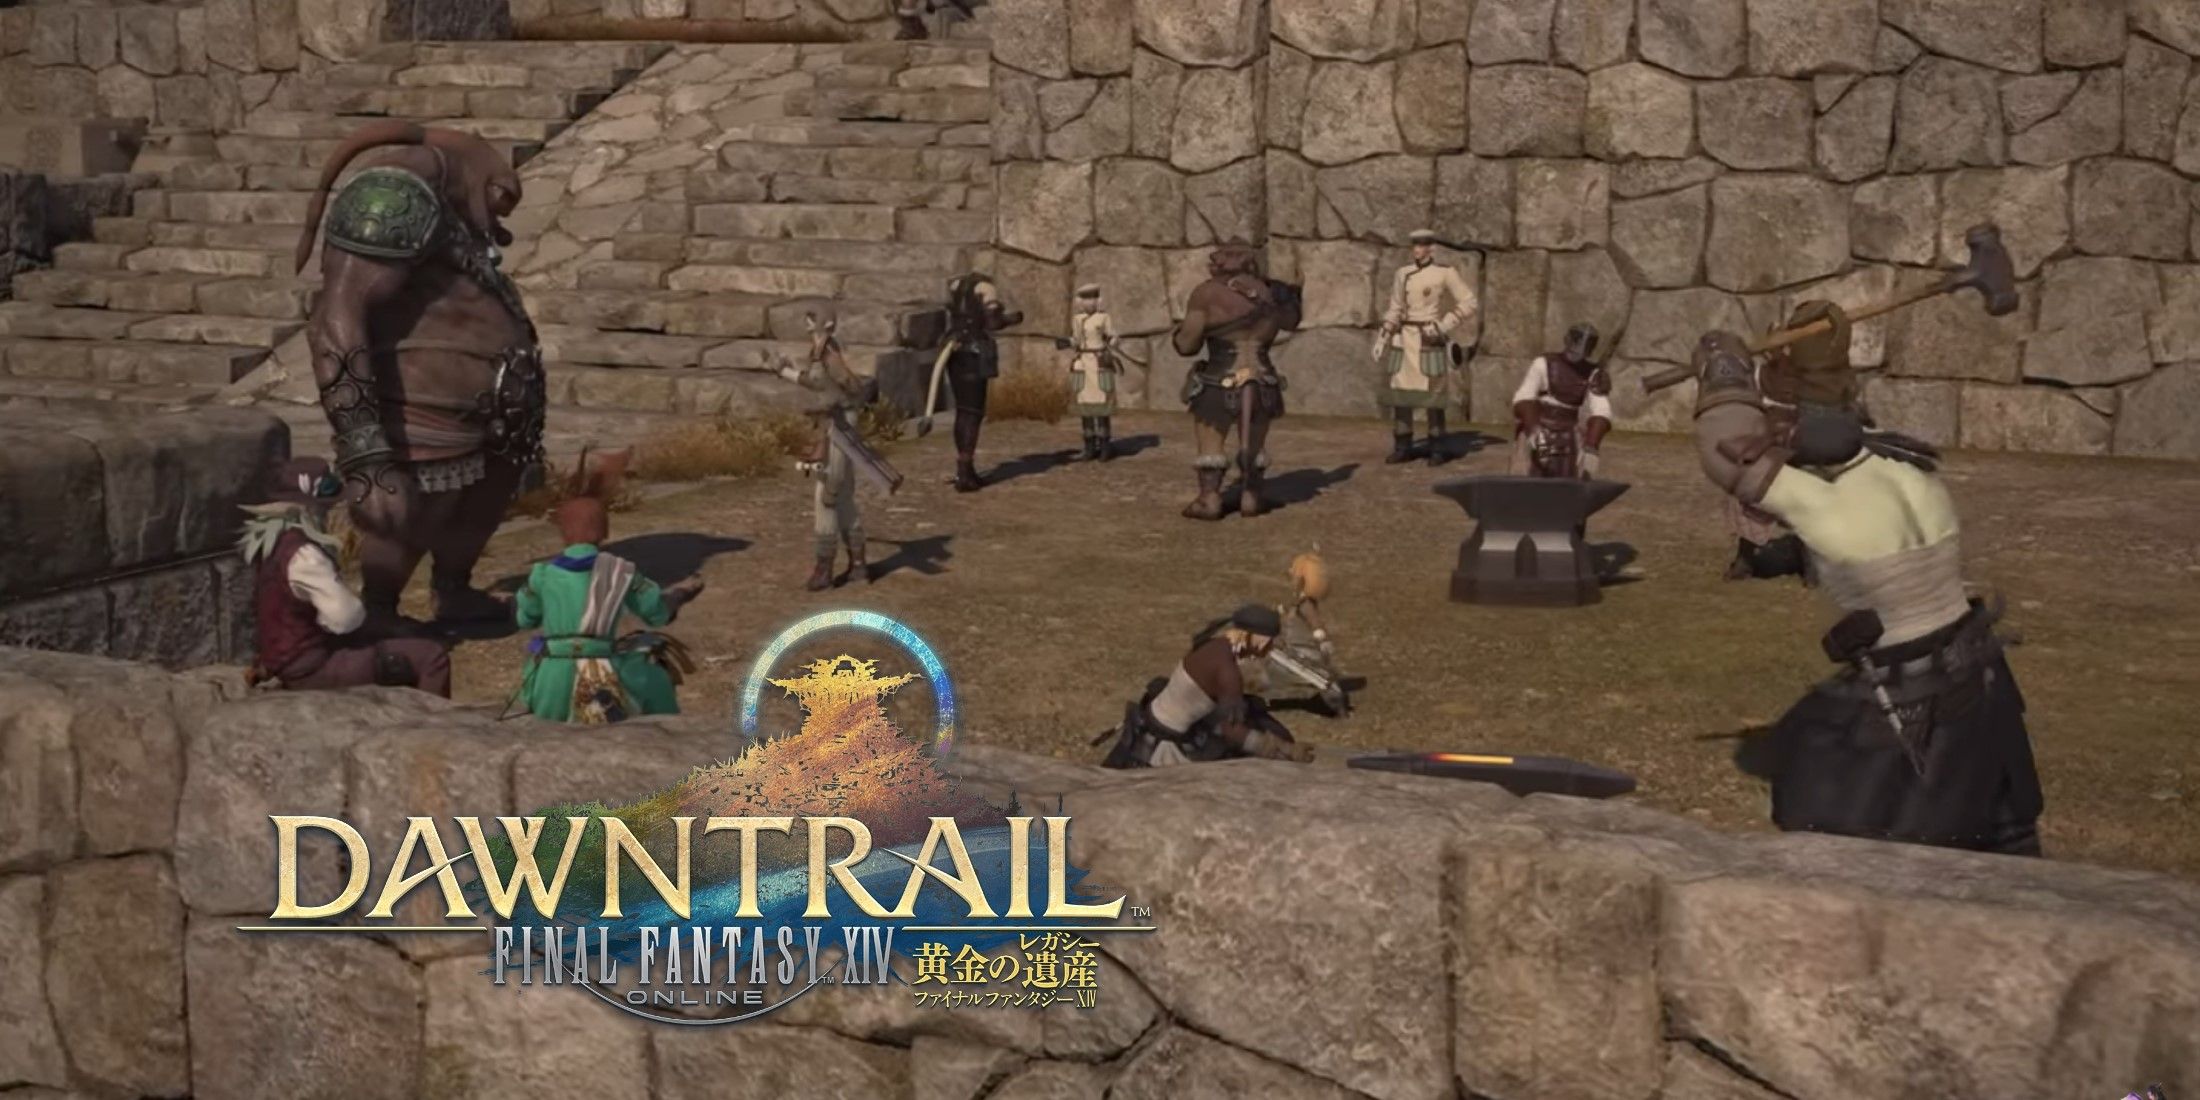 crafters from the ffxiv dawntrail benchmark